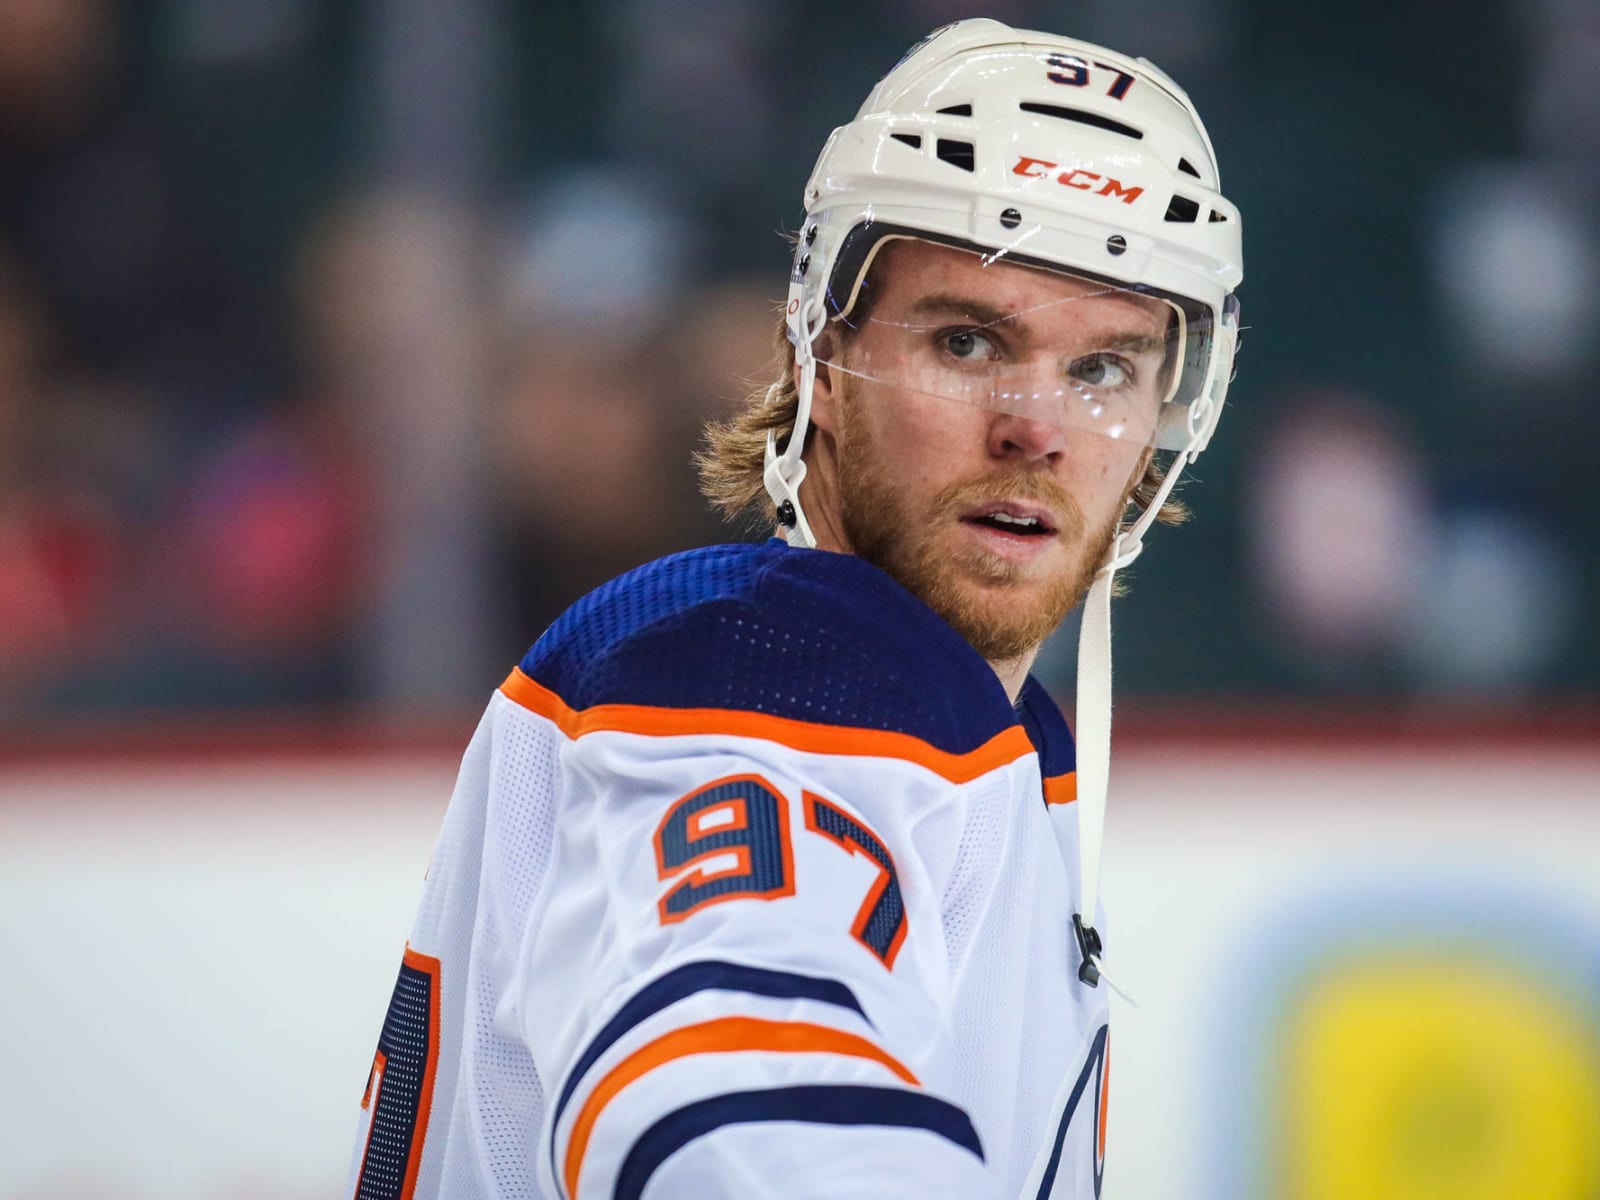 Who are the top 10 players in the NHL right now? - Quora